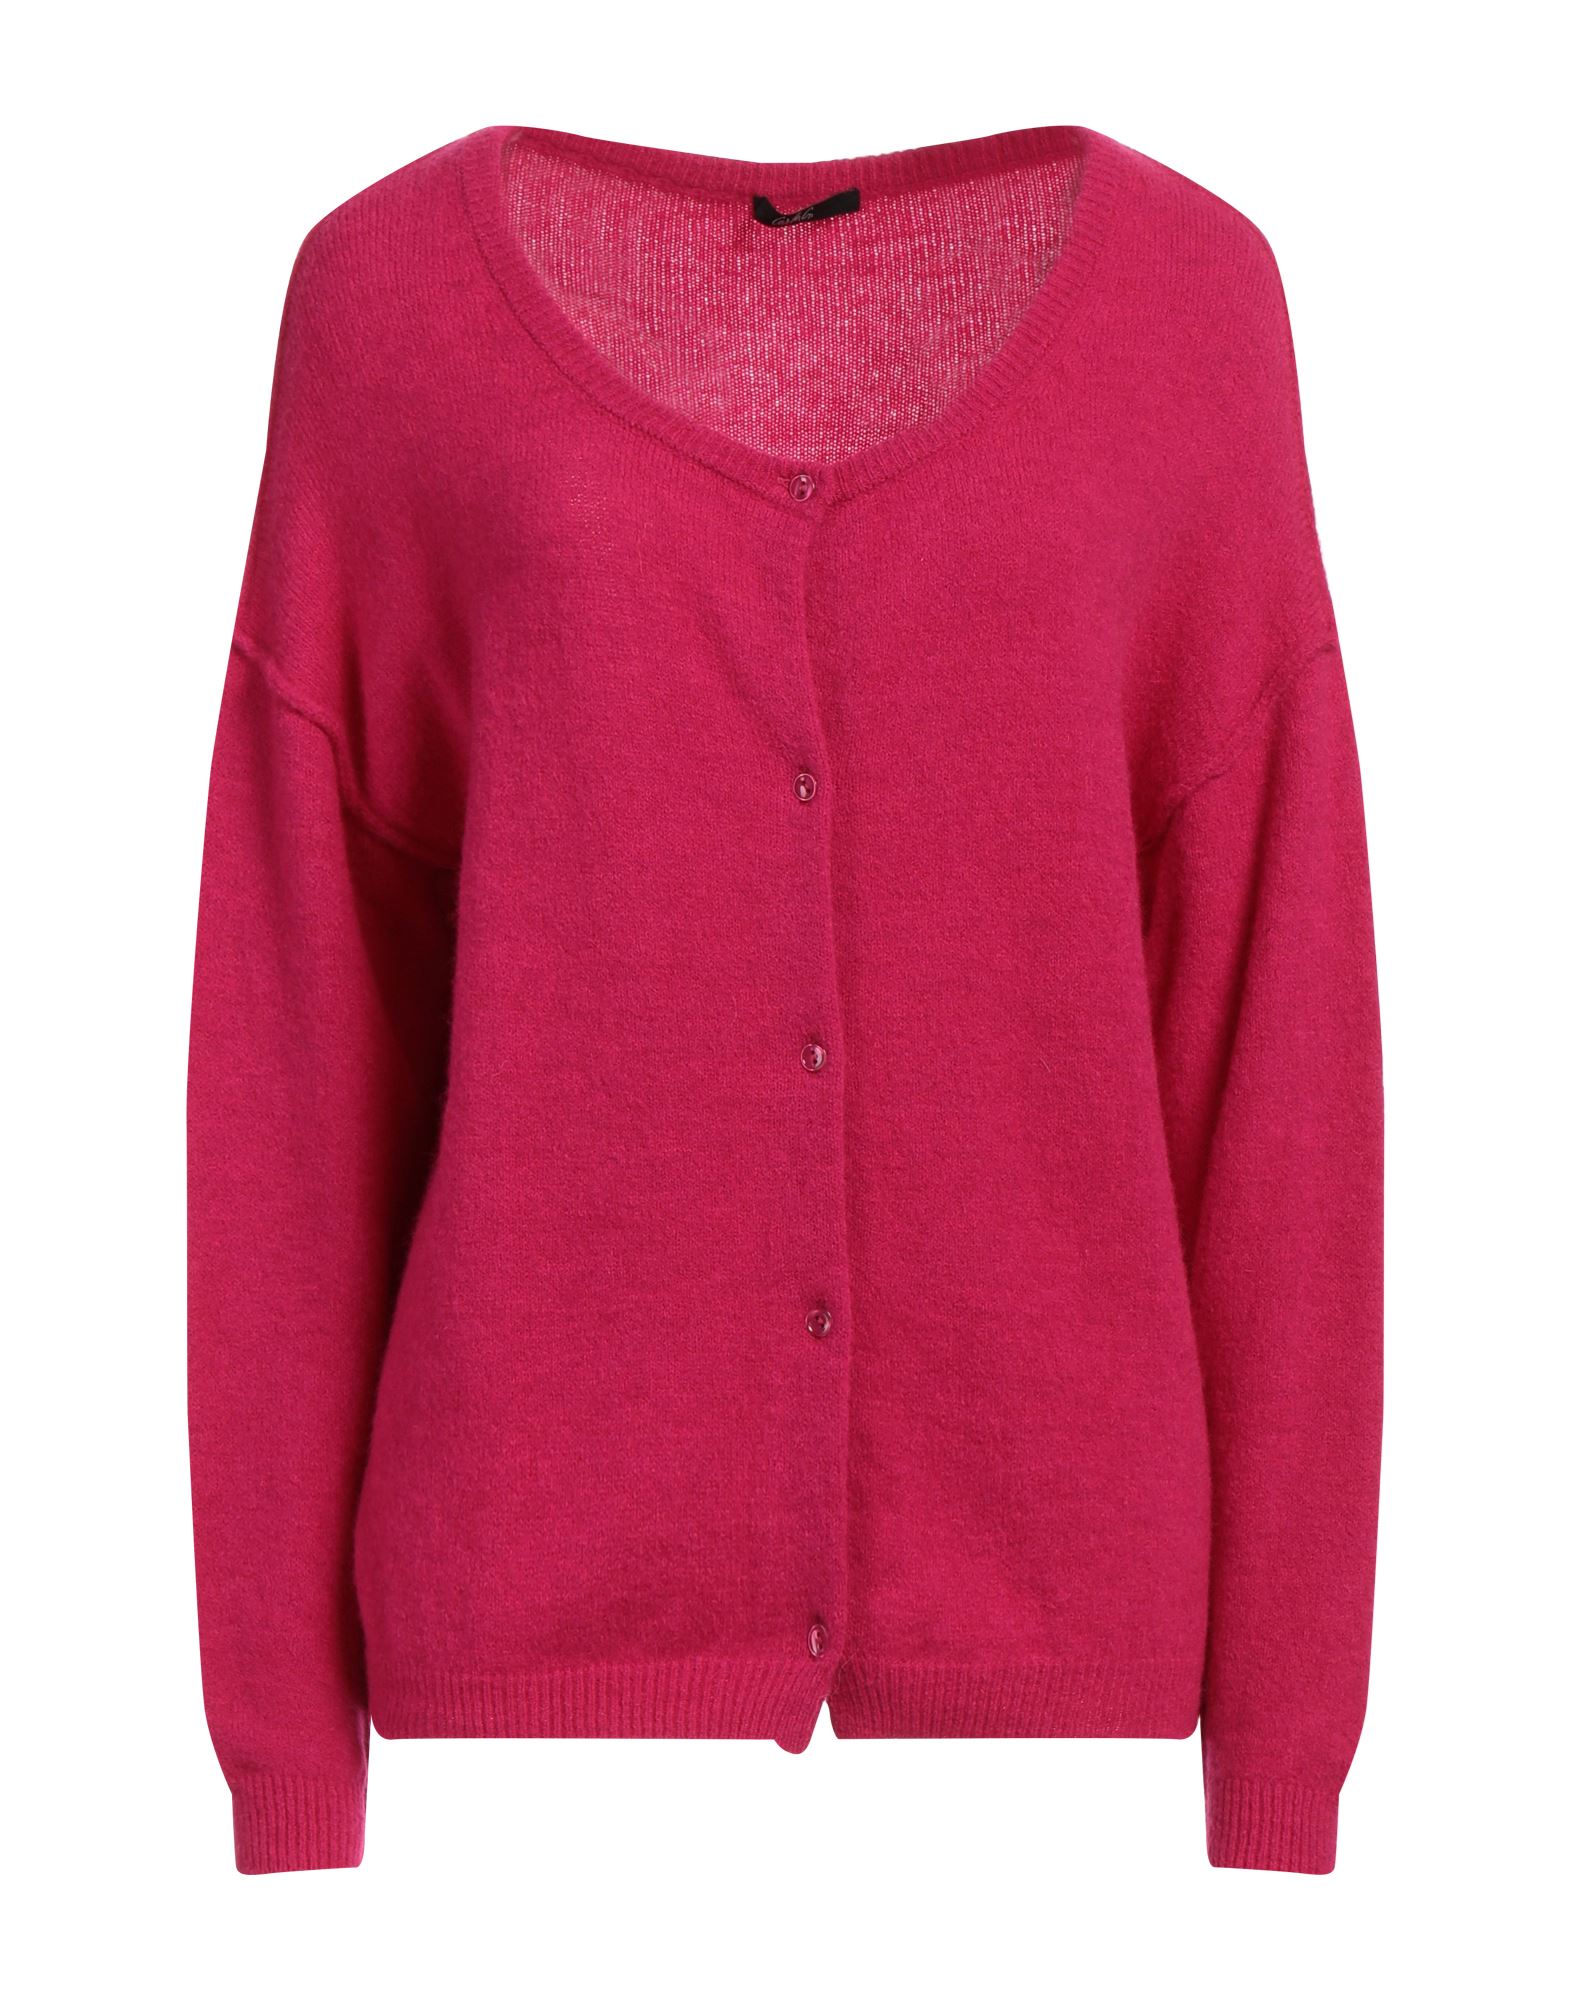 Carla G. Cardigans In Pink